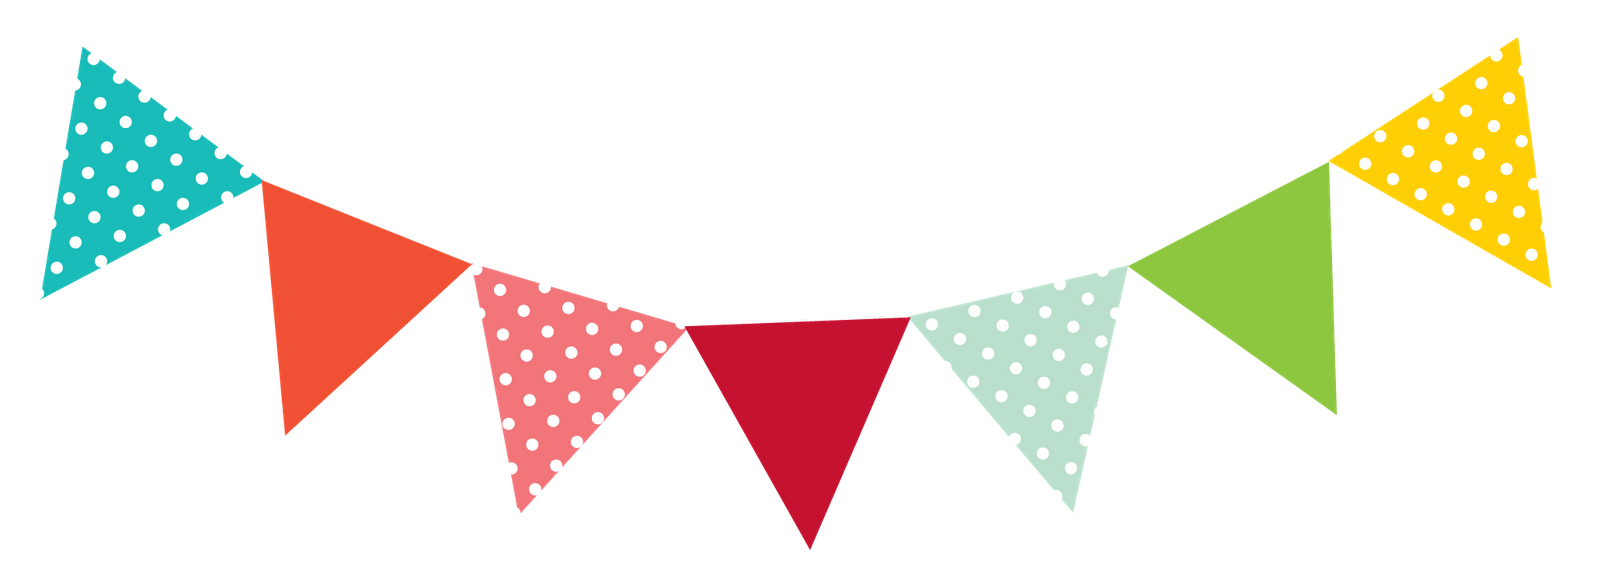 Bunting Clipart On Etsy A Global Handmade And Vintage Marketplace ...